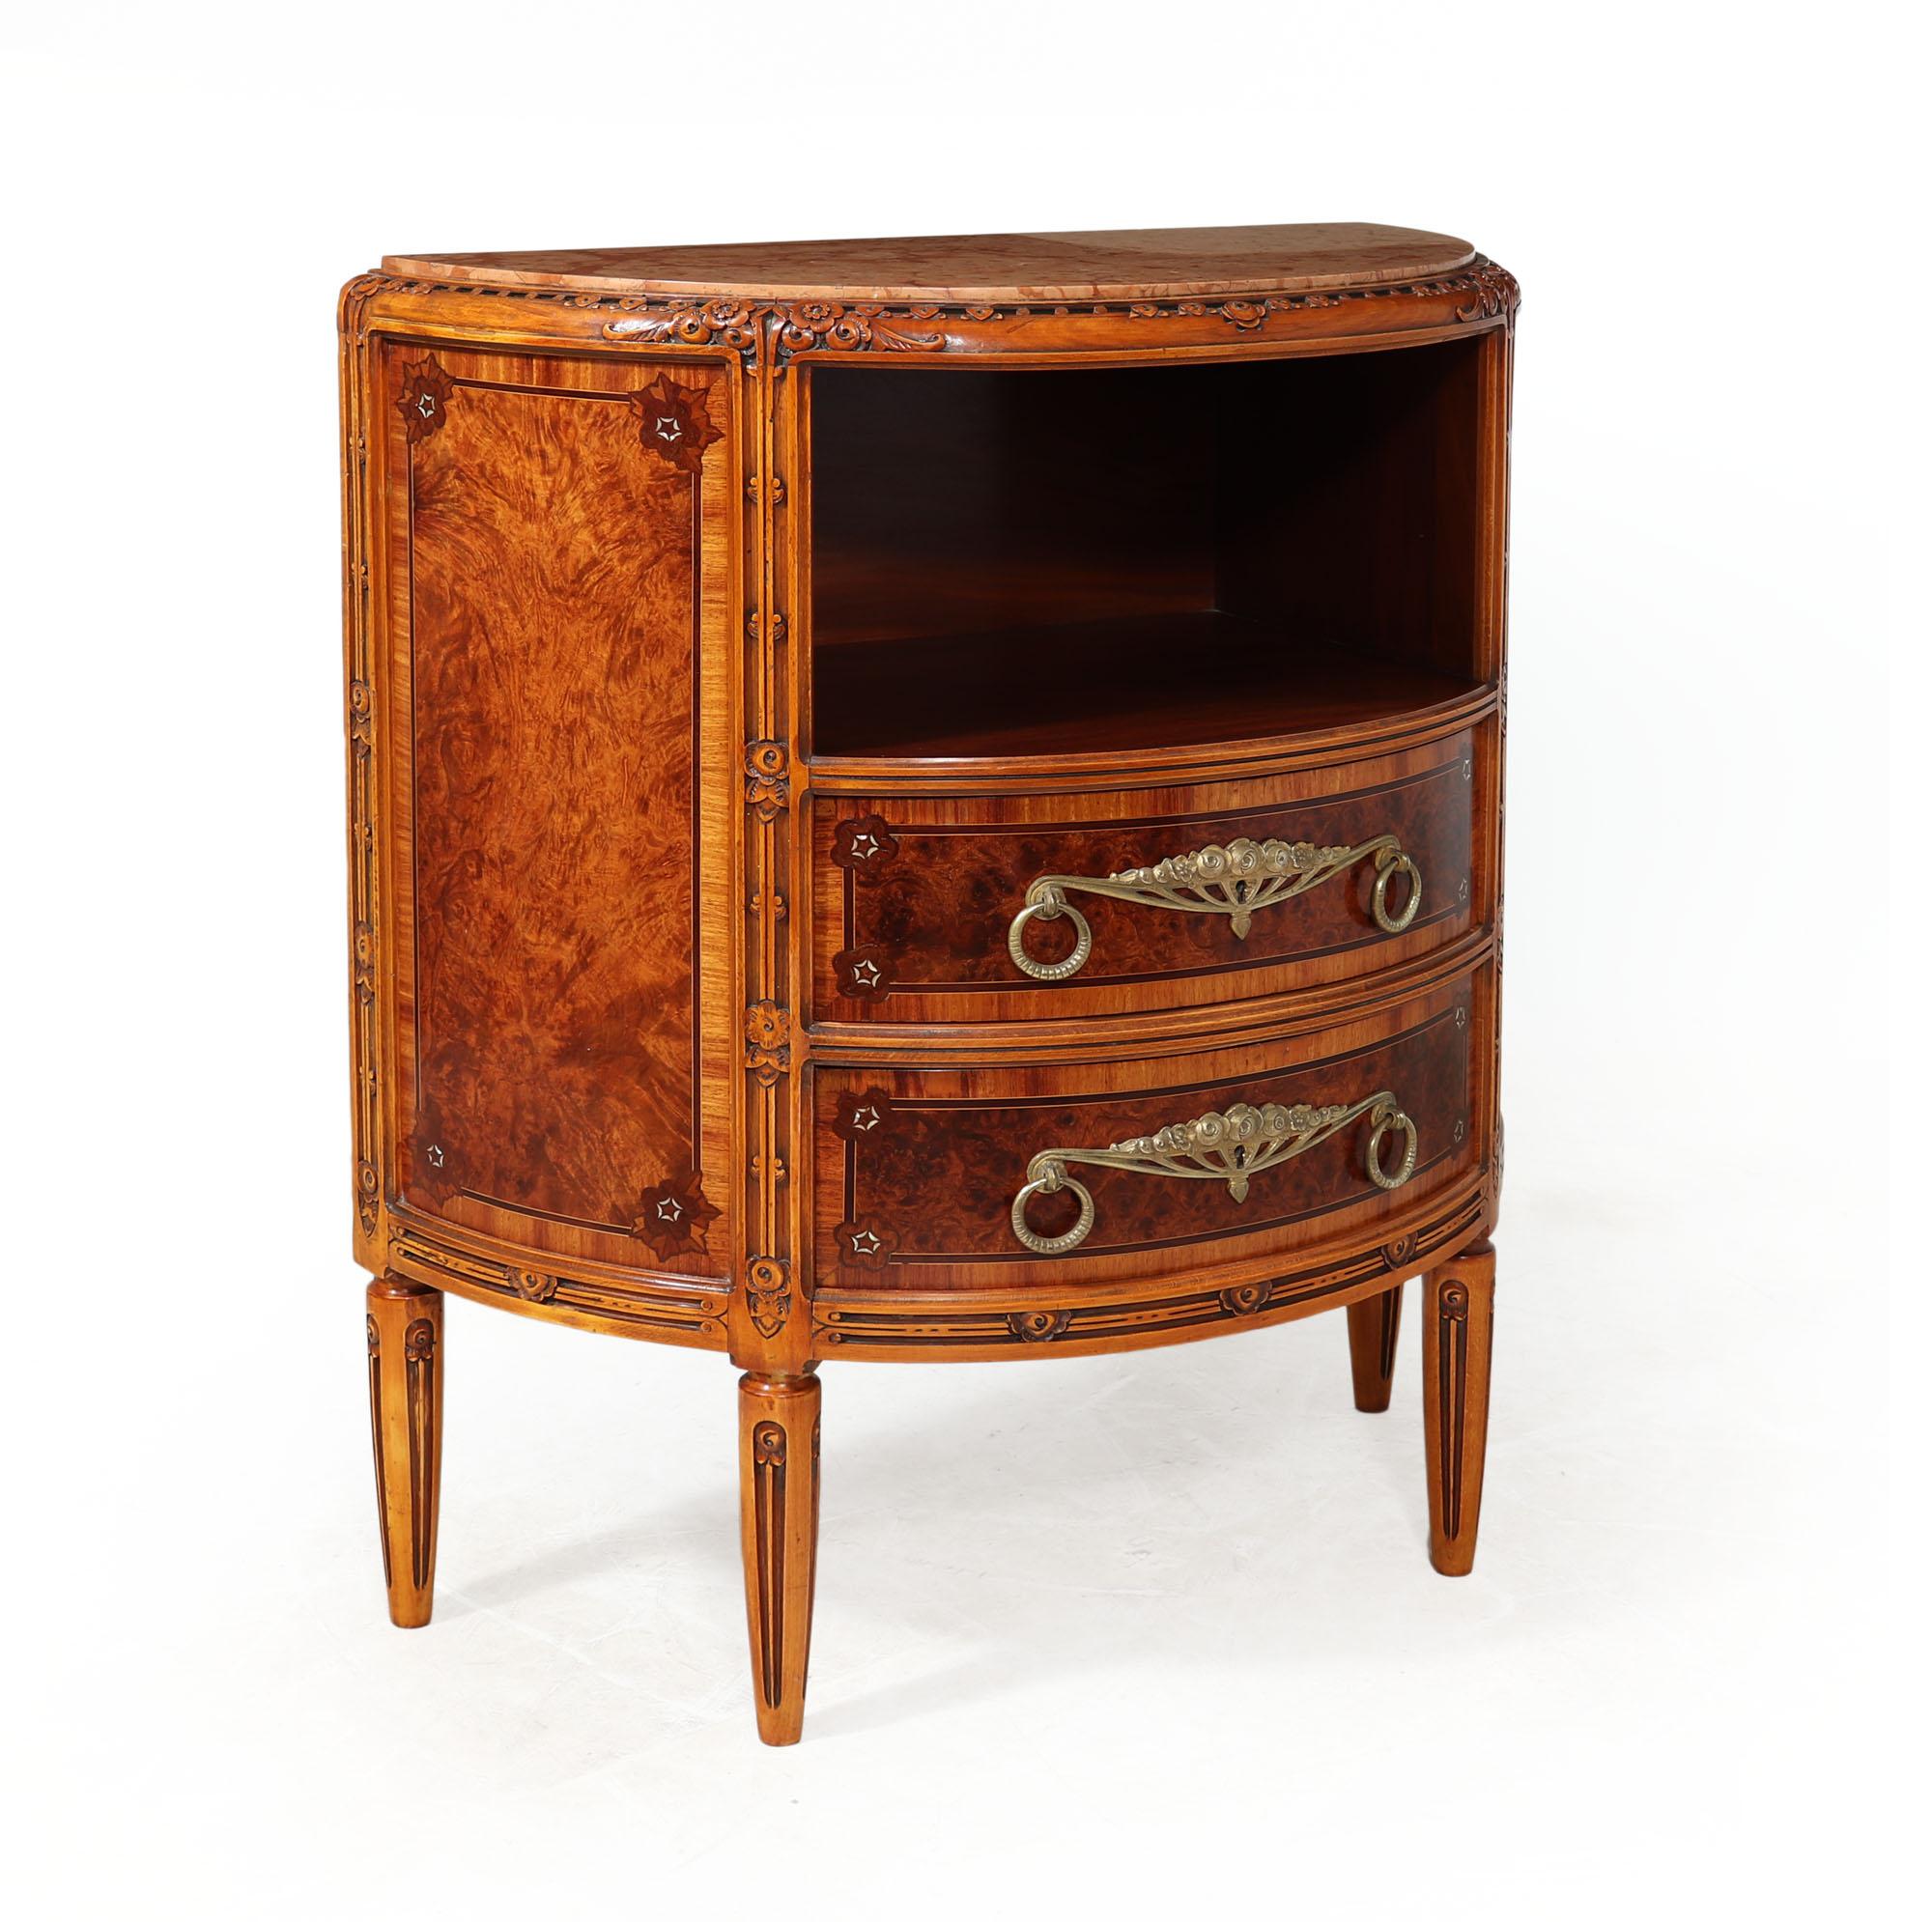 COMMODE BY MAJORELLE 
A stunning French Art Deco Commode from the 1920s by Majorelle! This exquisite piece features solid carved wood with intricate geometric and flower motifs, combined with elegant expensive veneers of walnut, maple, tulipwood and